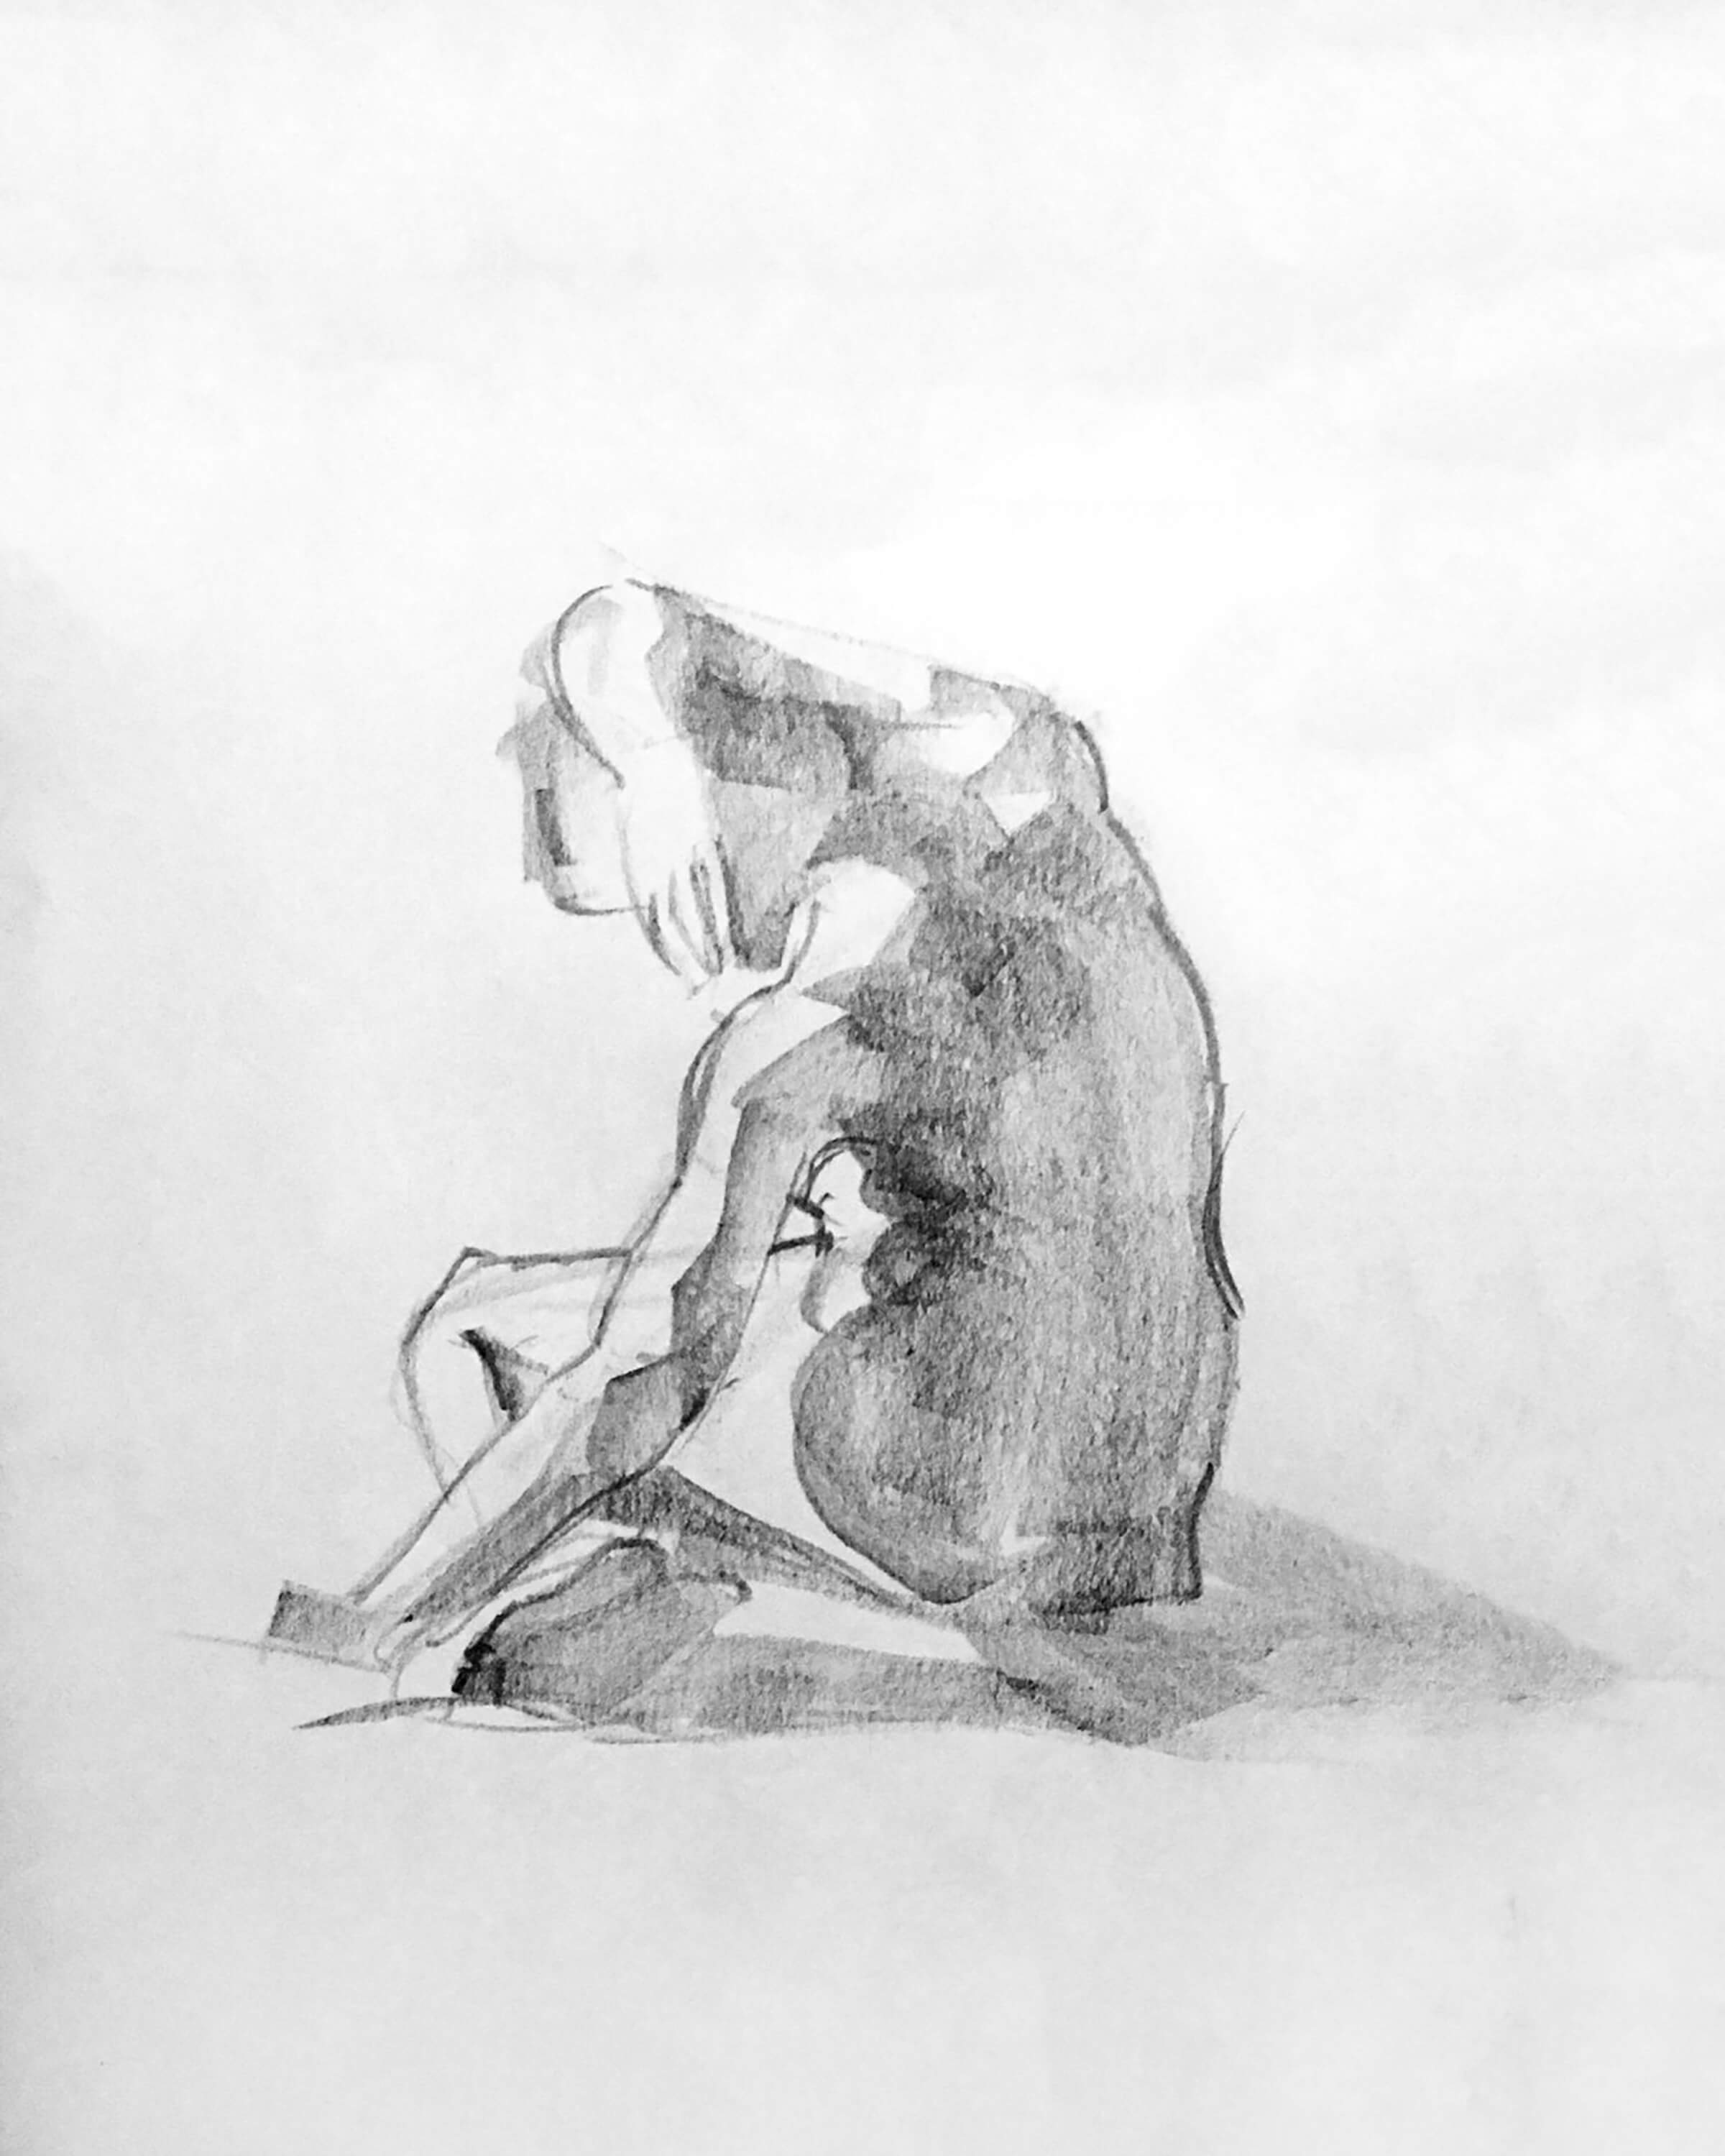 A sketch of a nude woman sitting down, her arm over her head